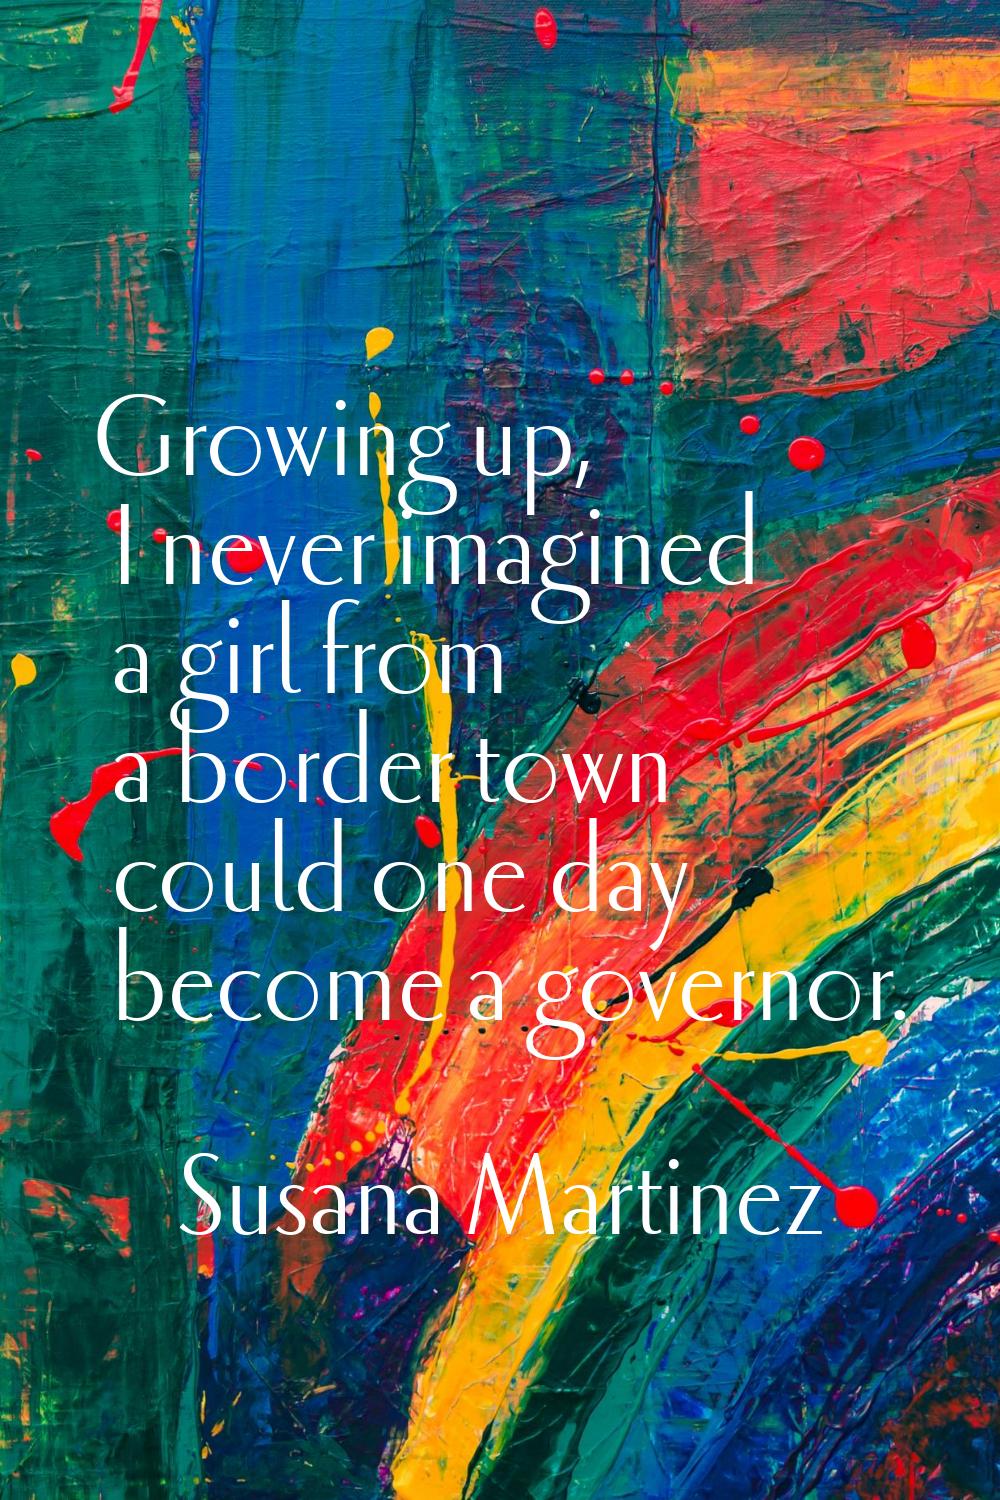 Growing up, I never imagined a girl from a border town could one day become a governor.